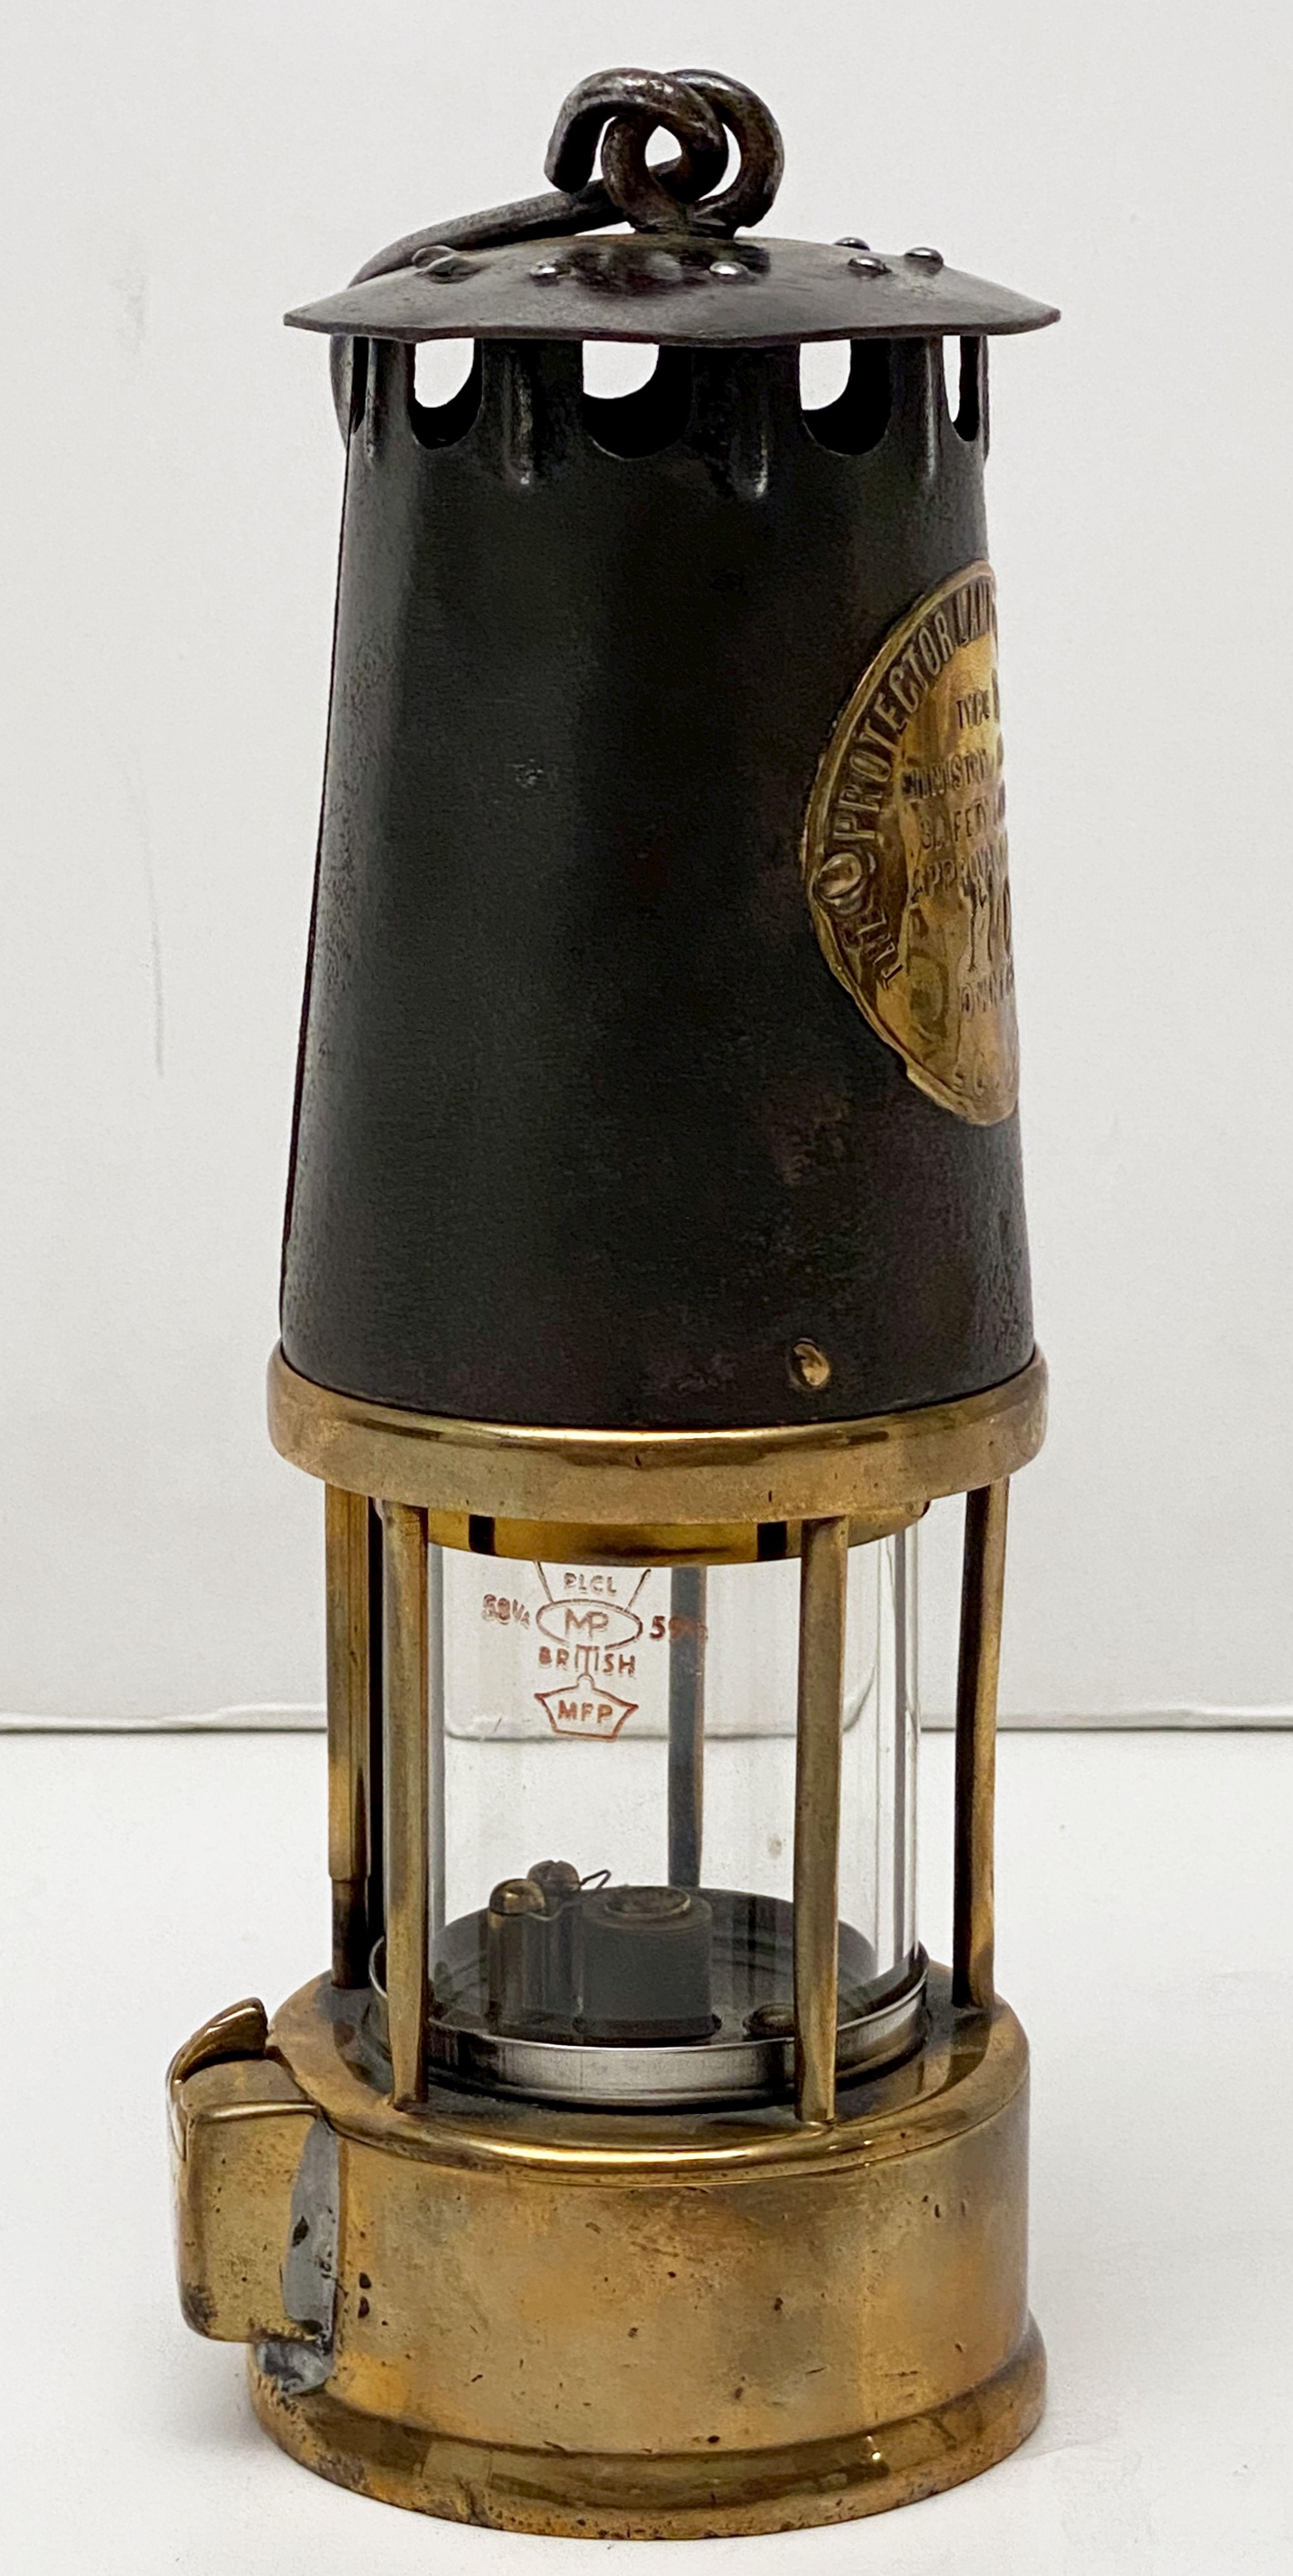 A fine vintage English miner's lamp or safety lantern of brass and steel in working order.
With maker's label - Inscription reads: 
The Protector Lamp & Lighting Co. Ltd, Type SL, Ministry of Power, Safety Lamps, Approval No B/120, Owners,